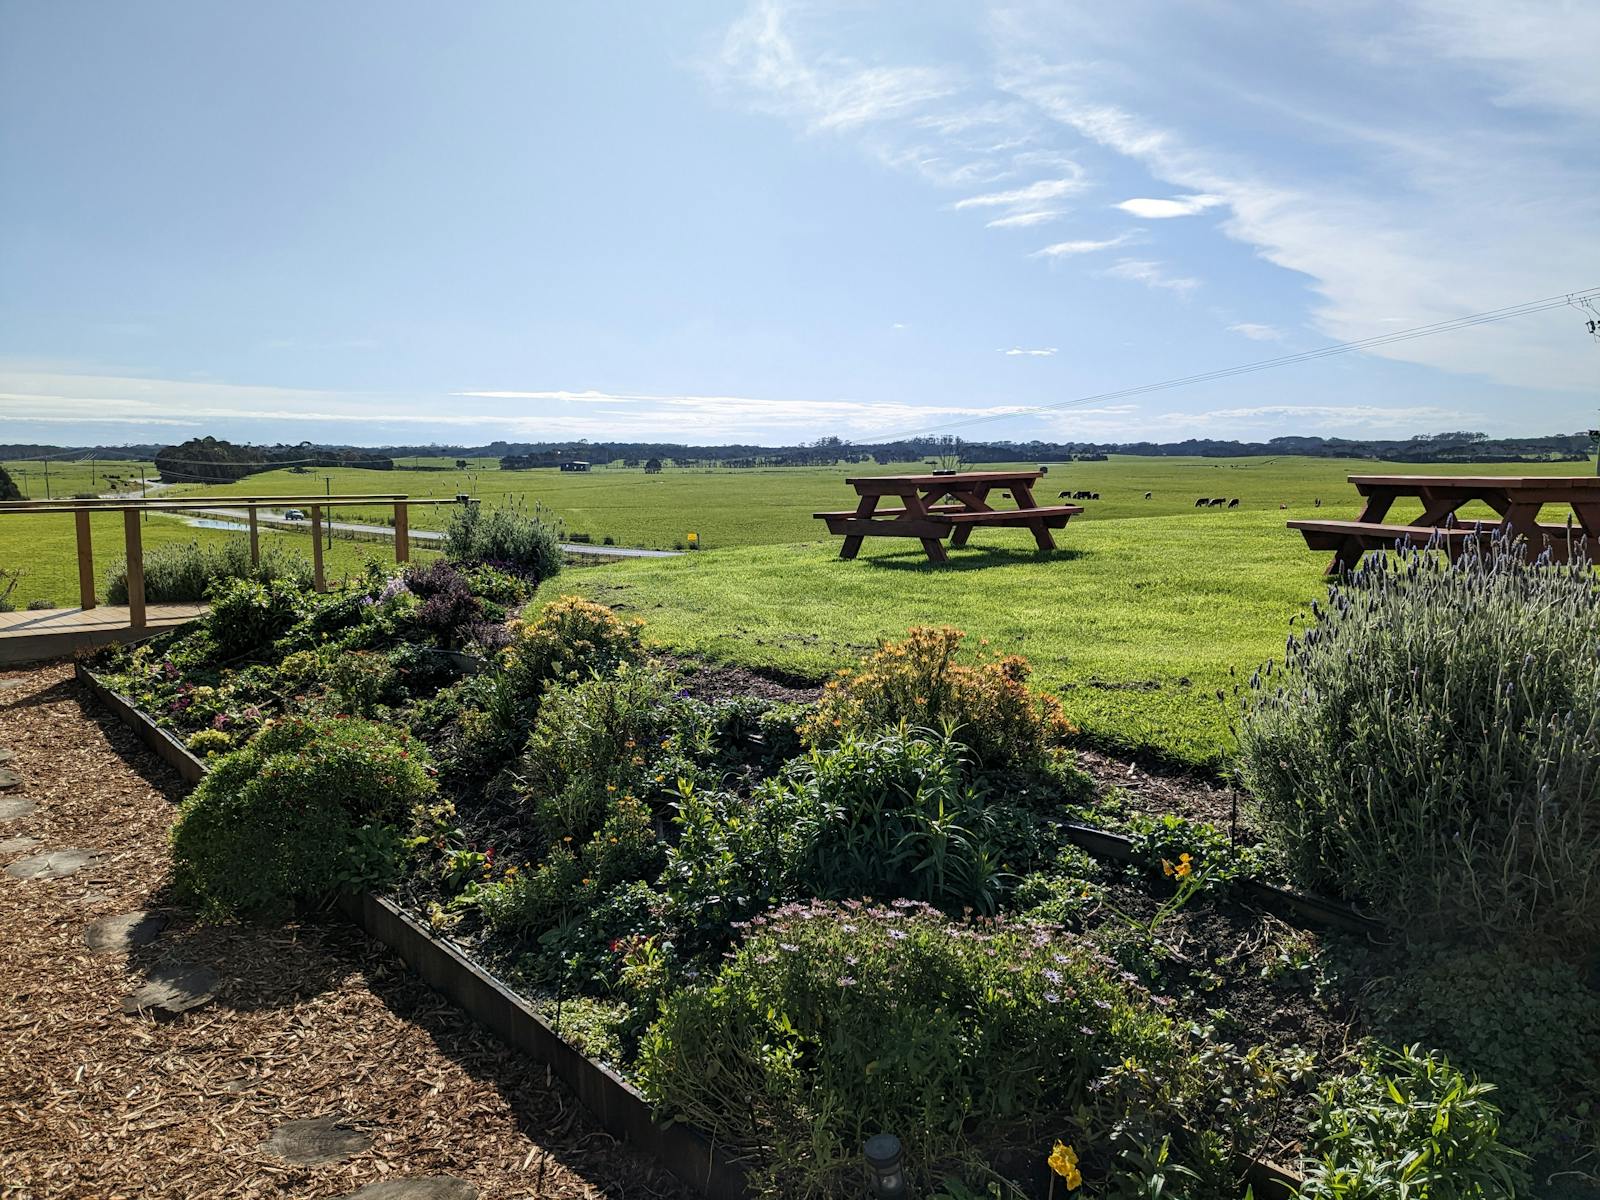 The view from King Island Brewhouse over green lawns and pastures